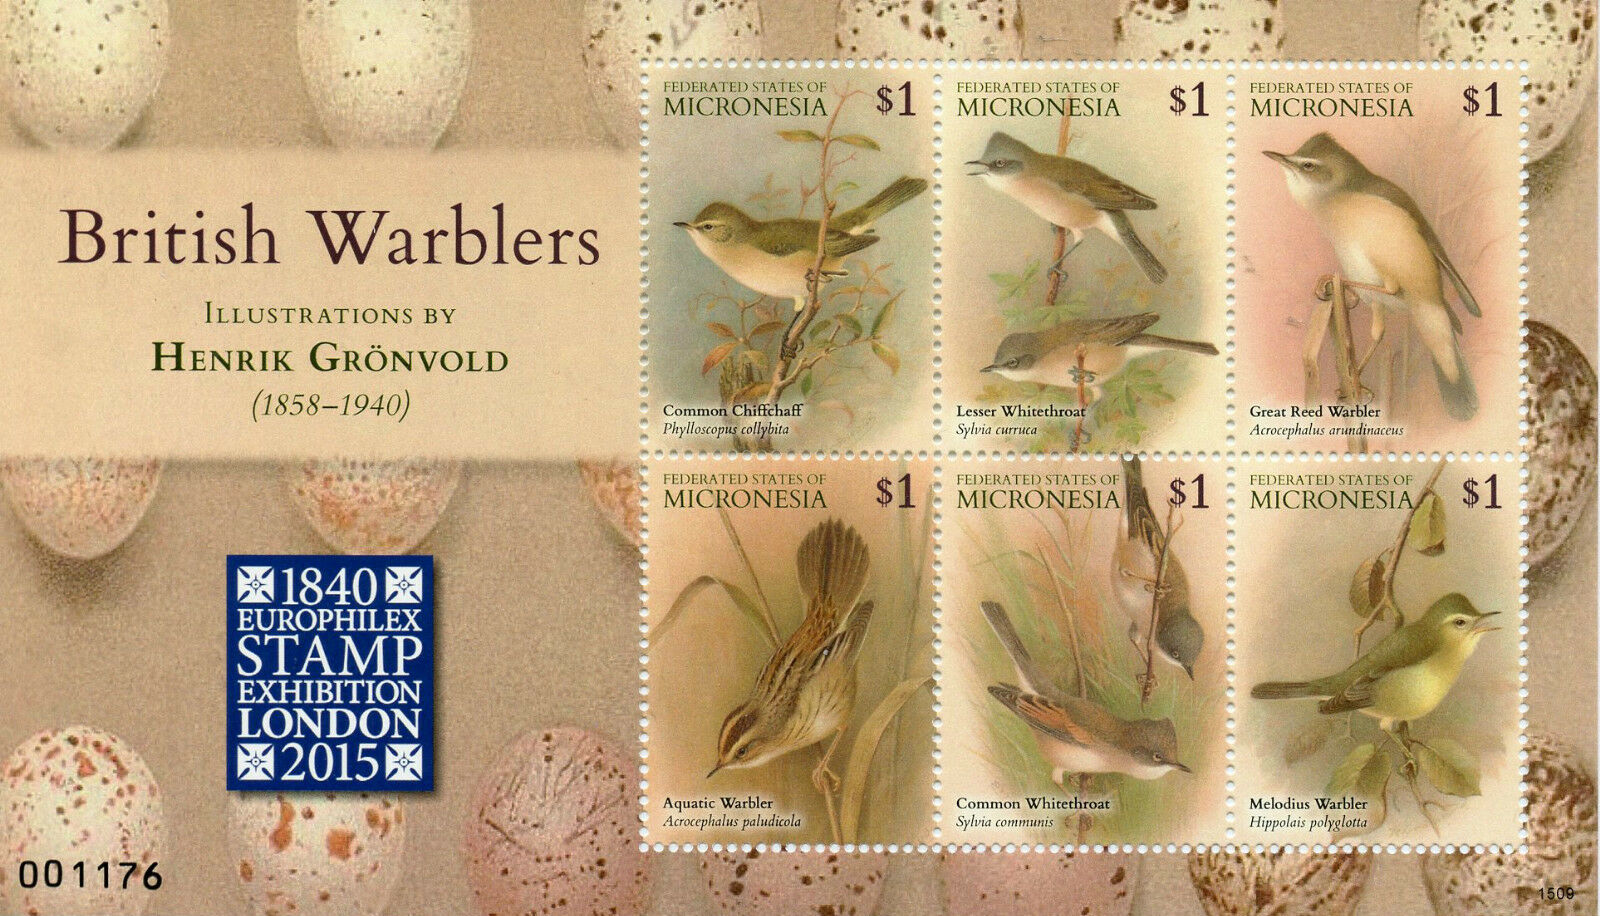 Micronesia Birds on Stamps 2015 MNH British Warblers Gronvold Europhilex 6v M/S